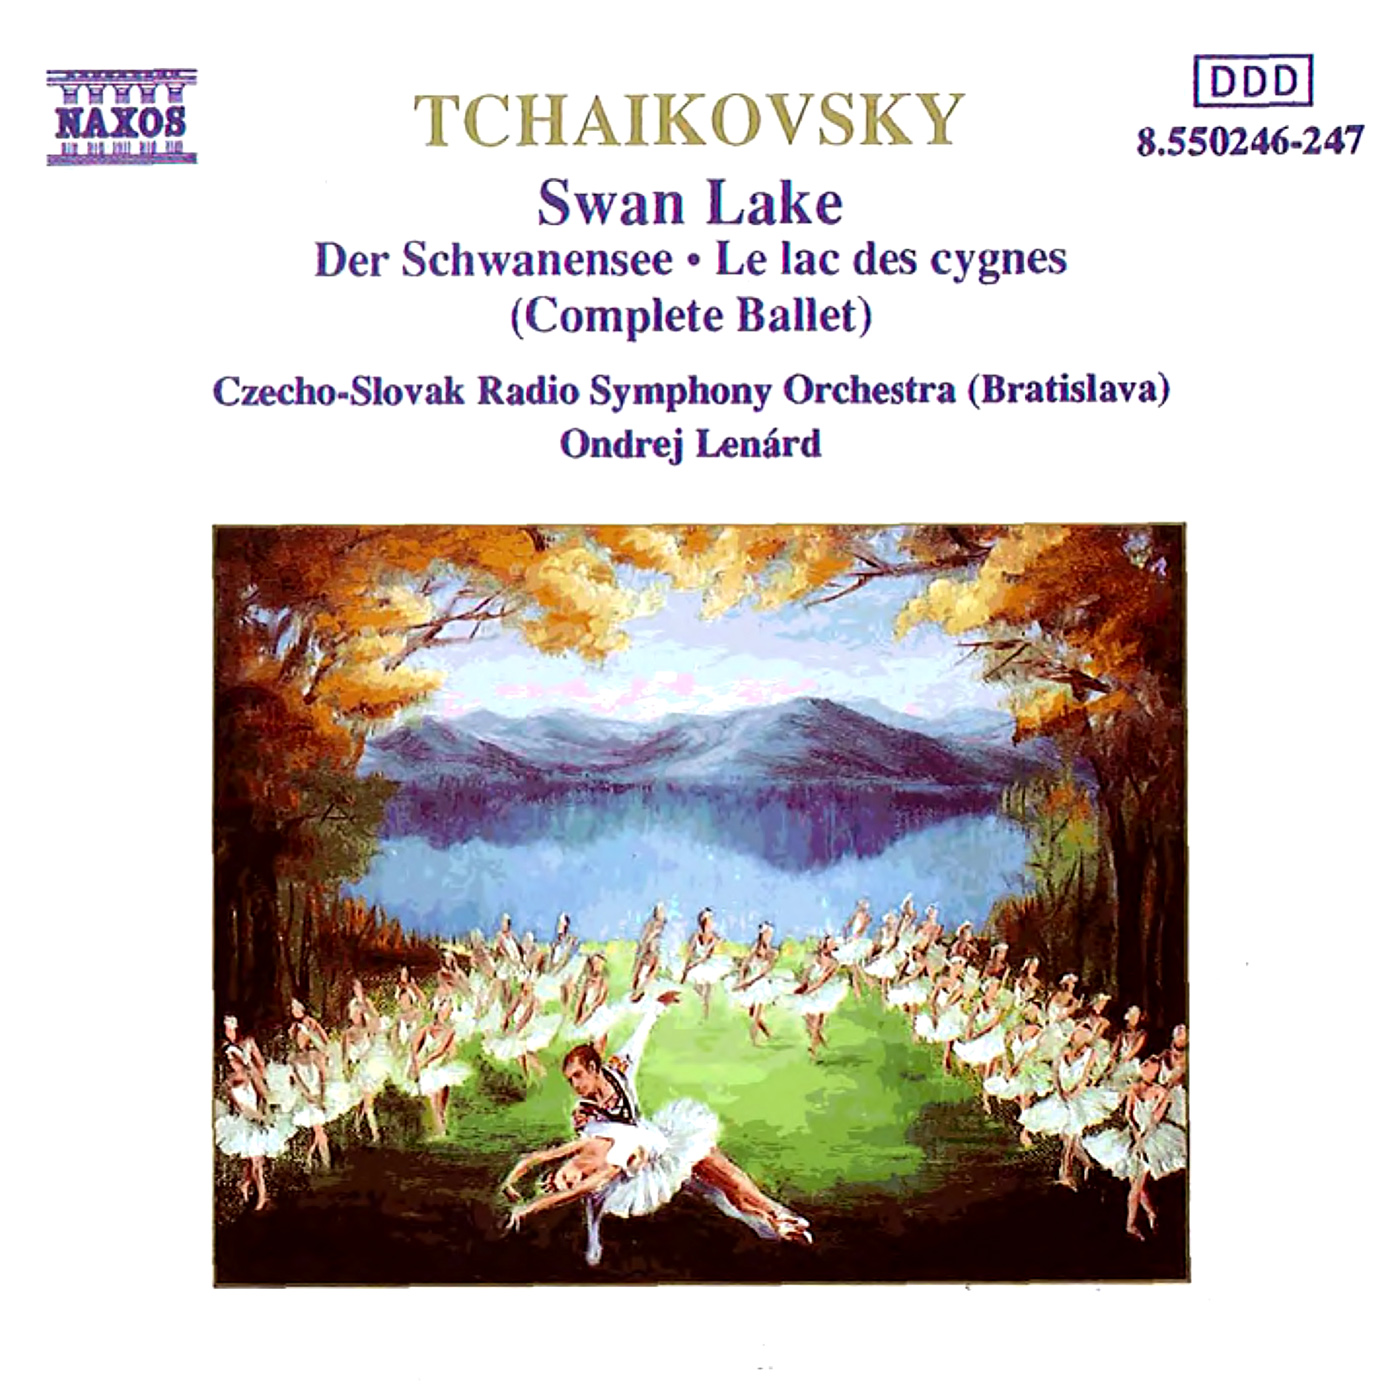 Swan Lake, Op. 20: Act I: The terrace in front of the palace of Prince Siegfried: Waltz - Entance of the Guests